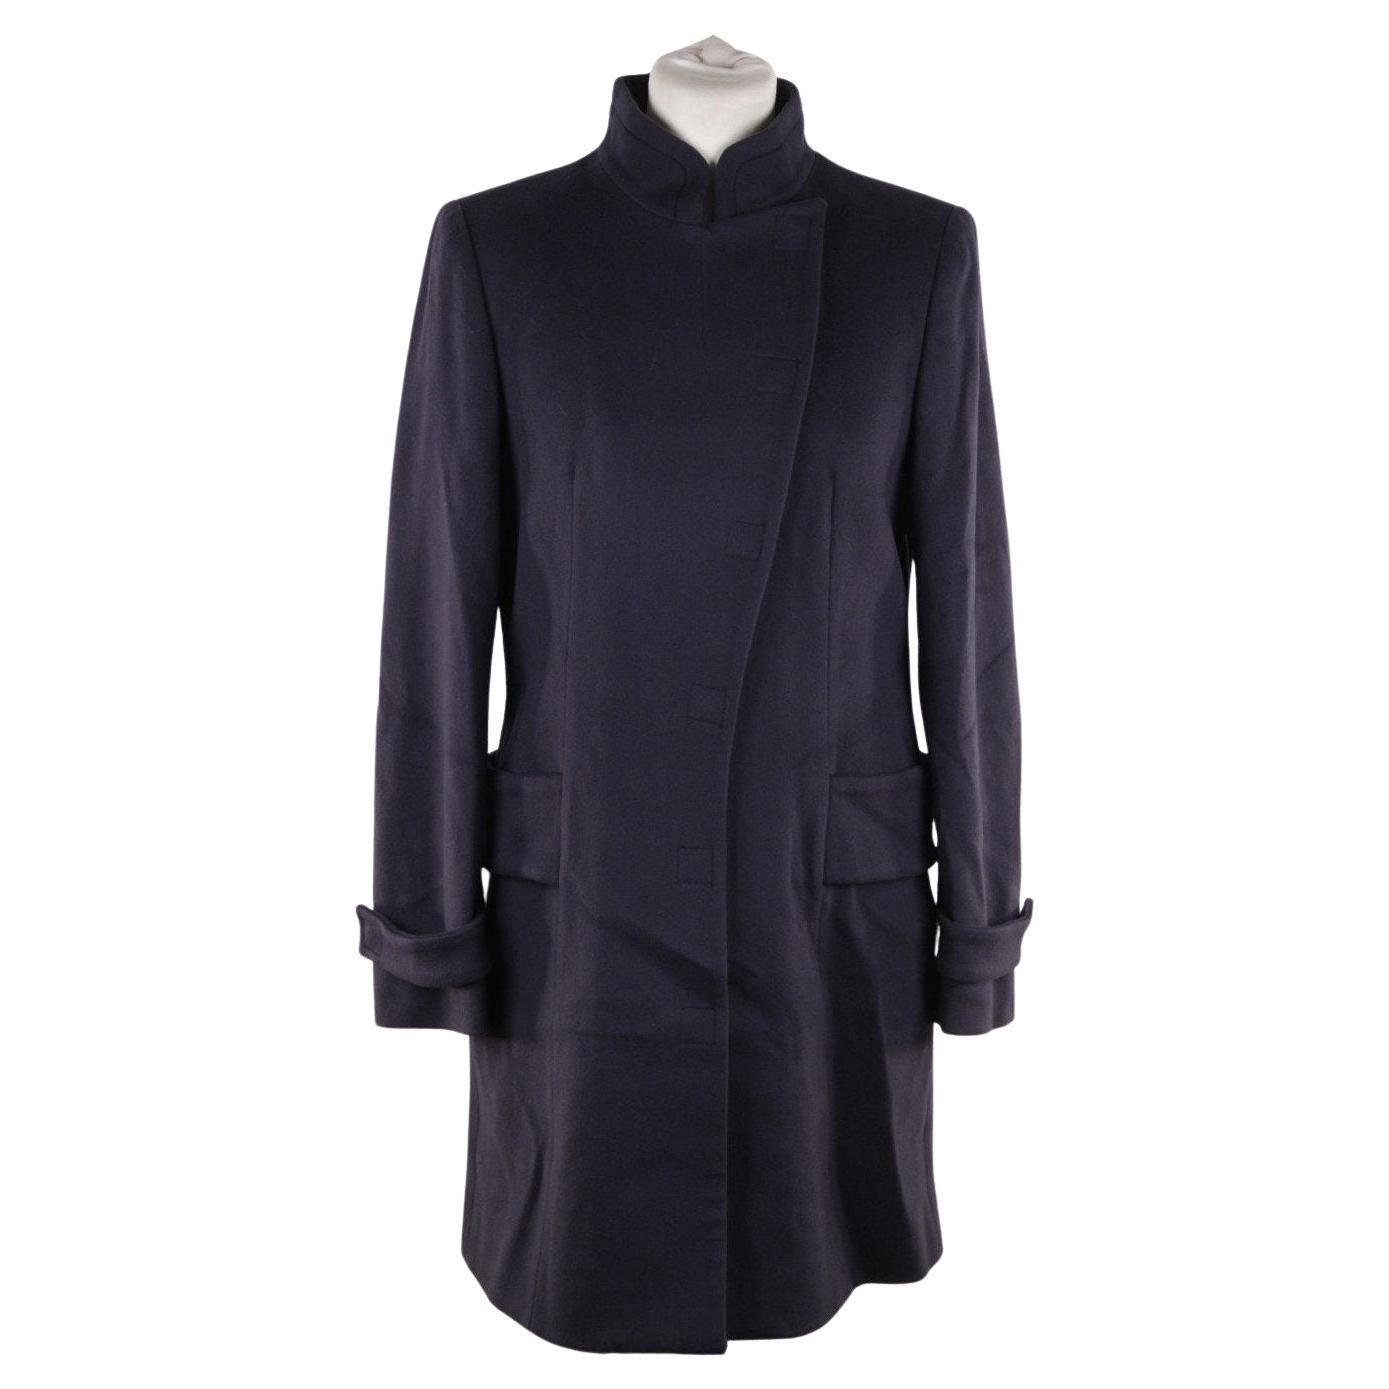 Versace Blue Wool Coat 2008 Fall Winter Collection Size 40 IT